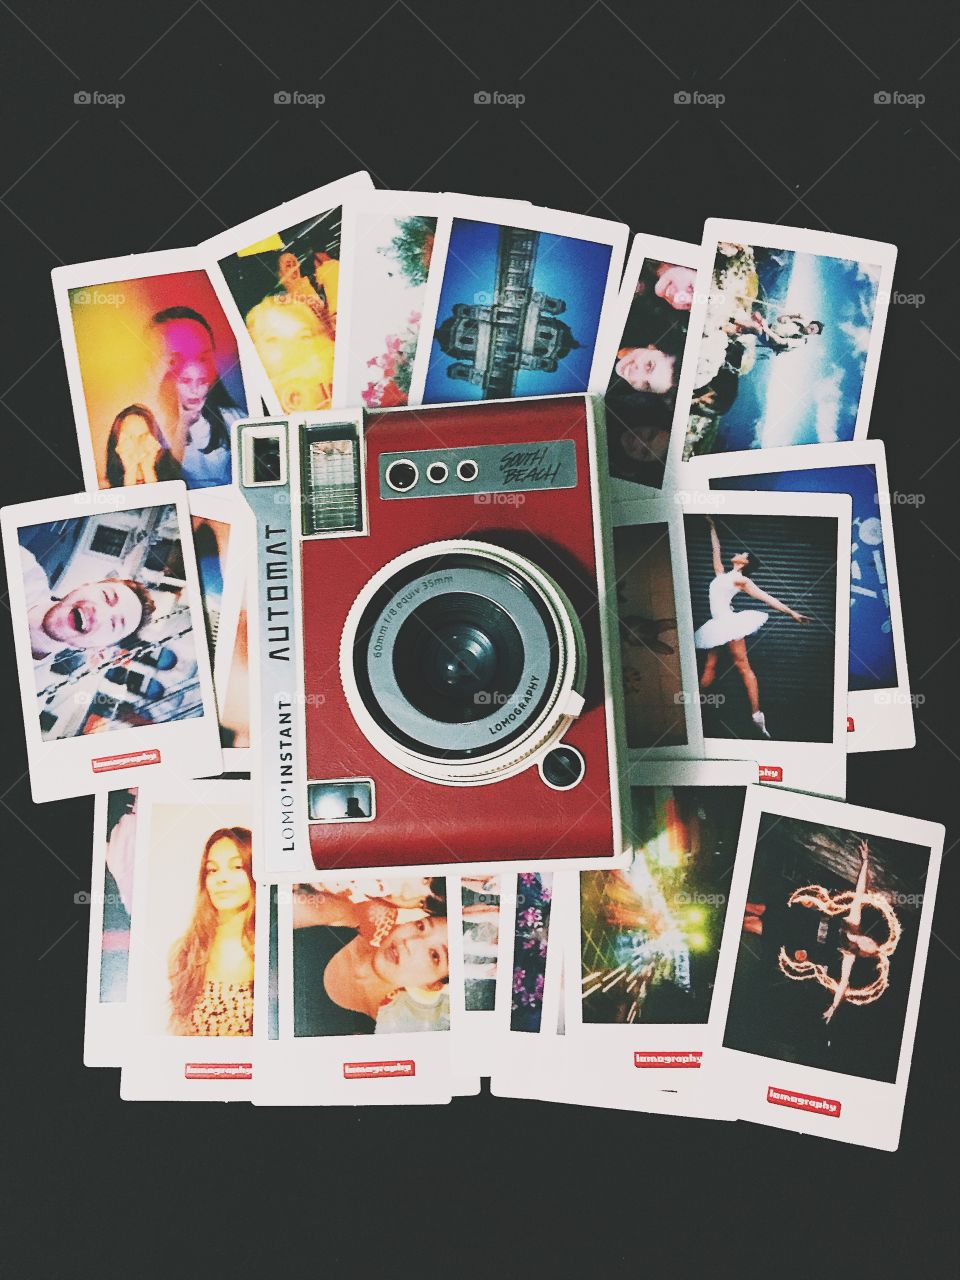 Sample pictures of lomography 